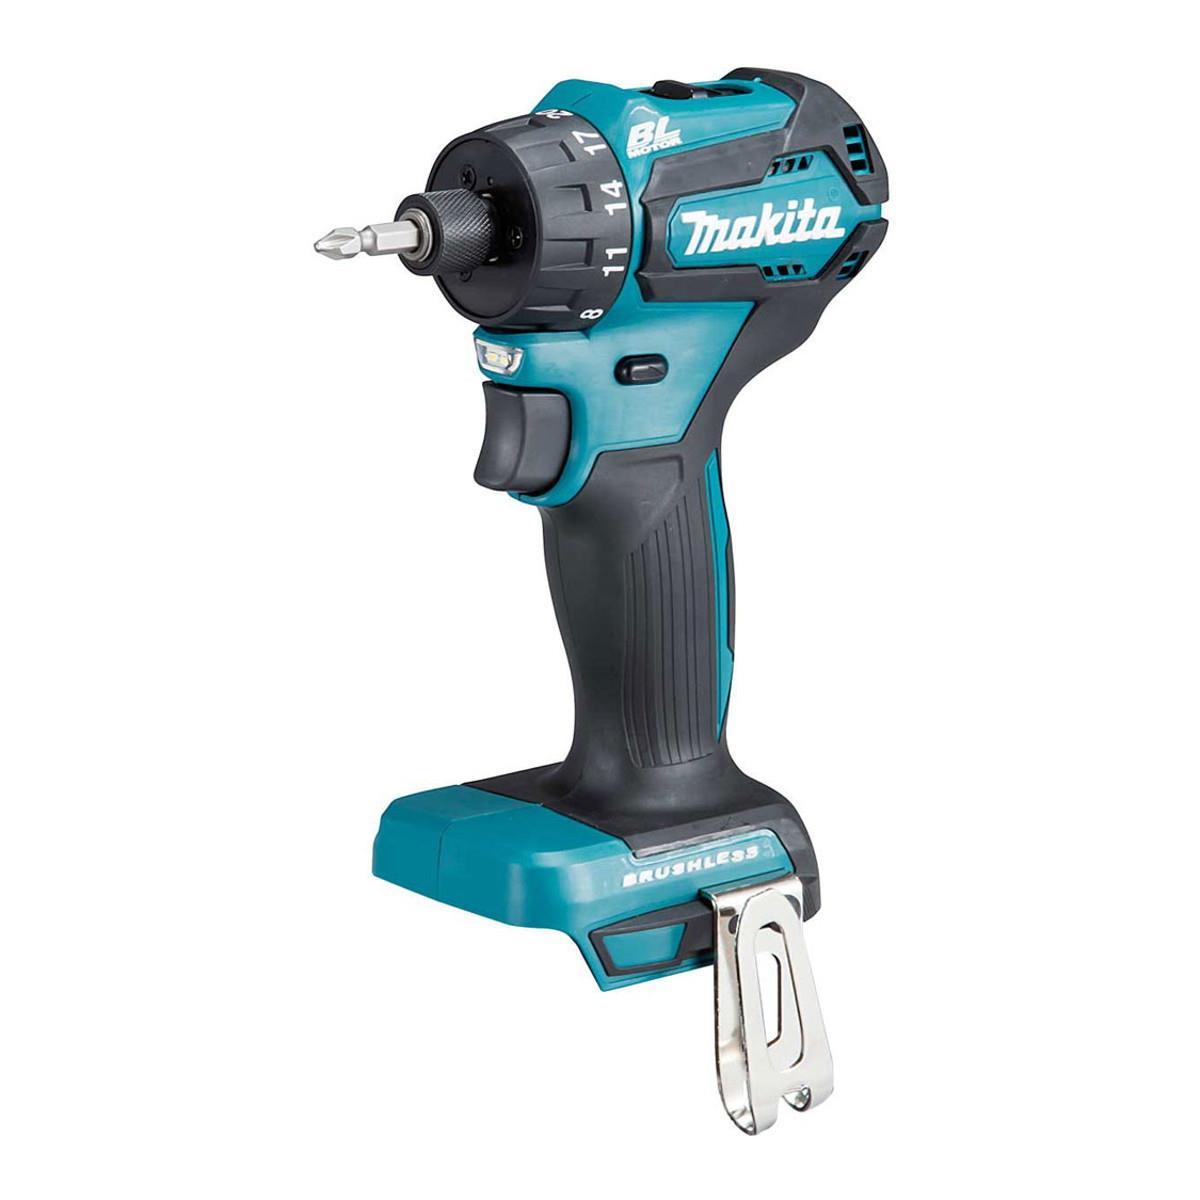 Makita DDF083Z LXT Compact (124mm) Brushless Drill Driver; 18 Volt; Bare Unit (Body Only)